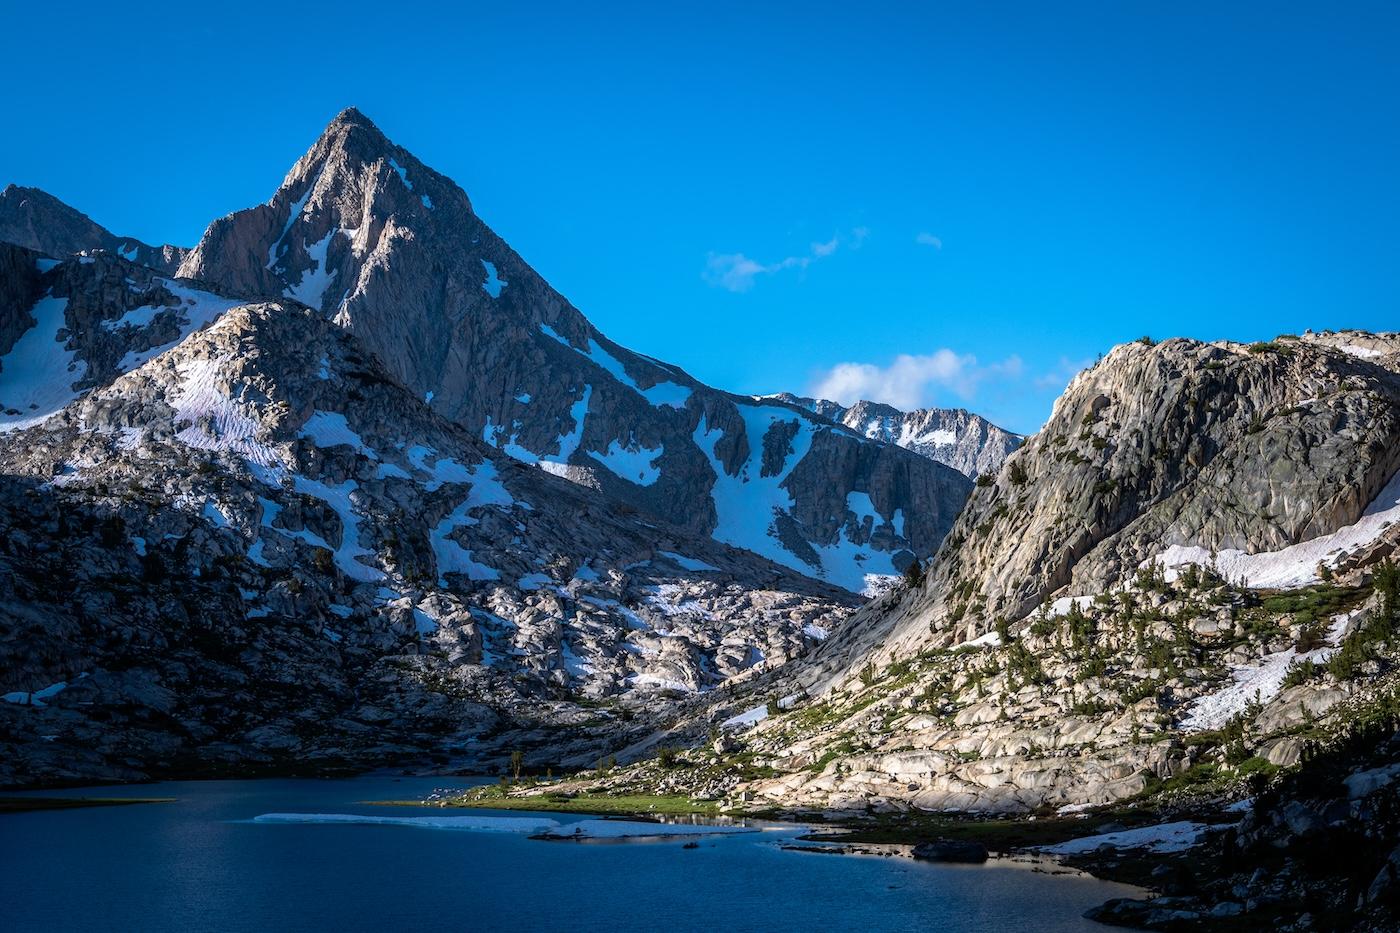 The mountains over Evolution Lake in Kings Canyon National Park